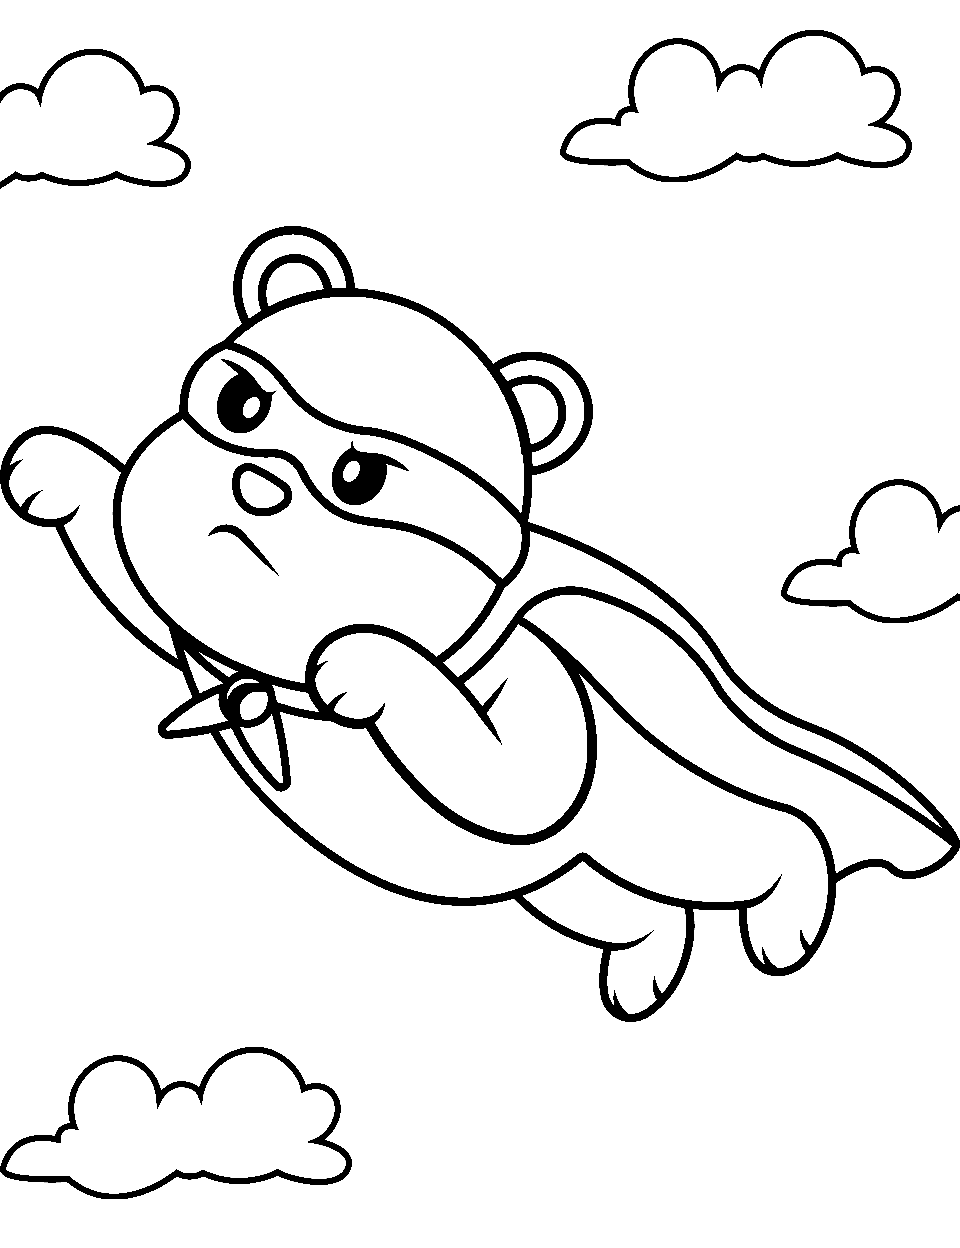 Young Superhero Bear Coloring Page - A young bear in a superhero costume flying high above.